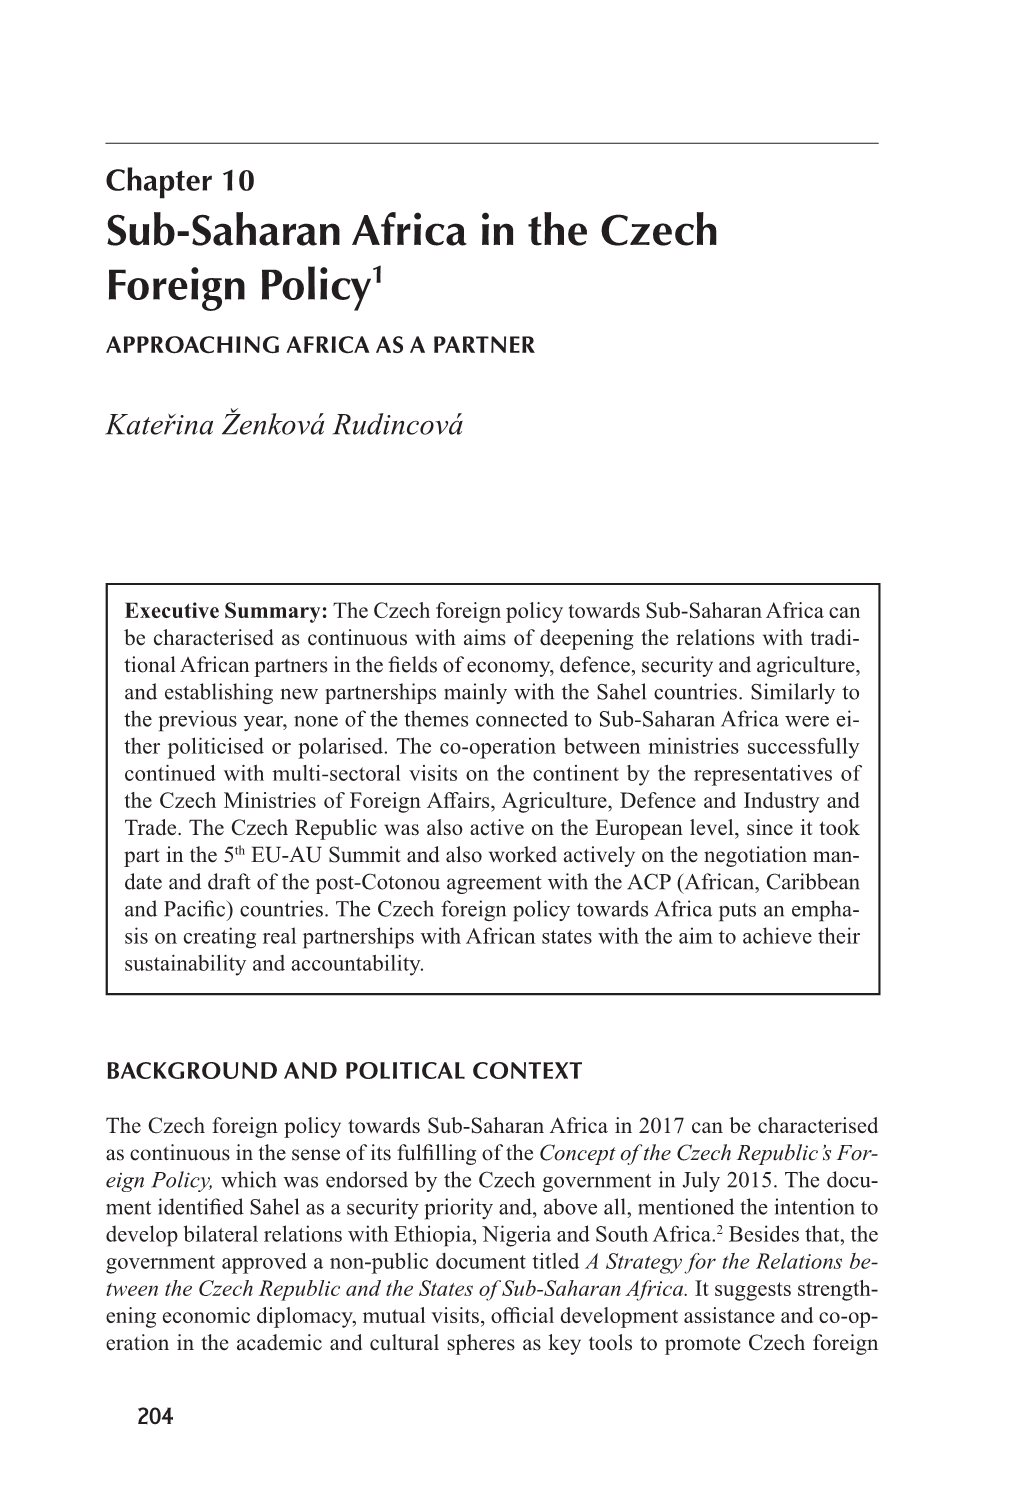 Sub-Saharan Africa in the Czech Foreign Policy1